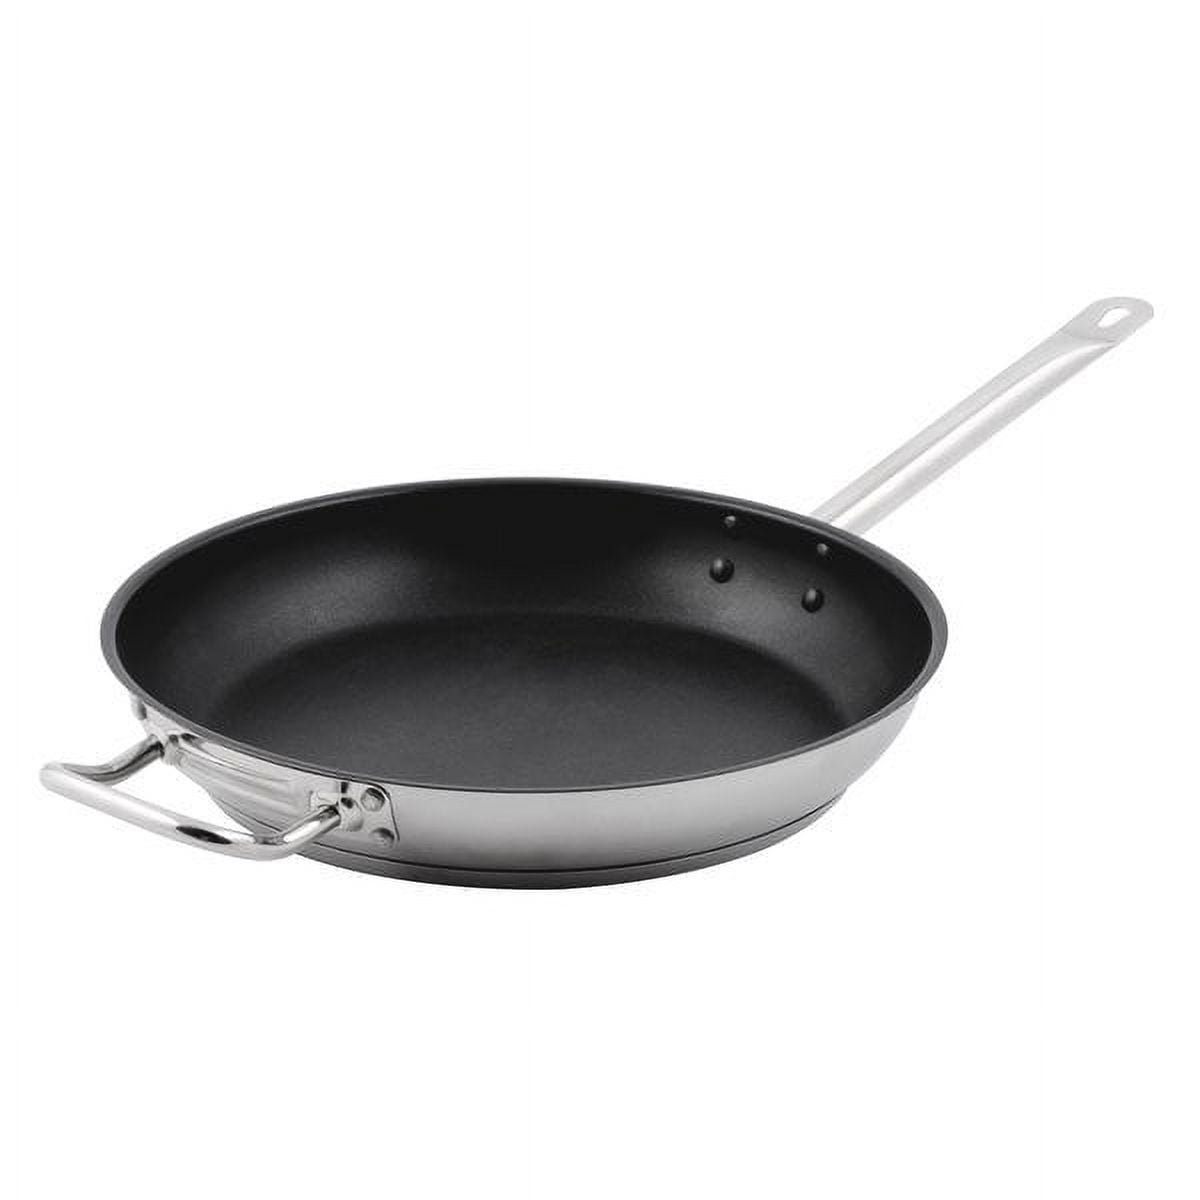 Vigor 11 Stainless Steel Non-Stick Fry Pan with Aluminum-Clad Bottom and Excalibur Coating